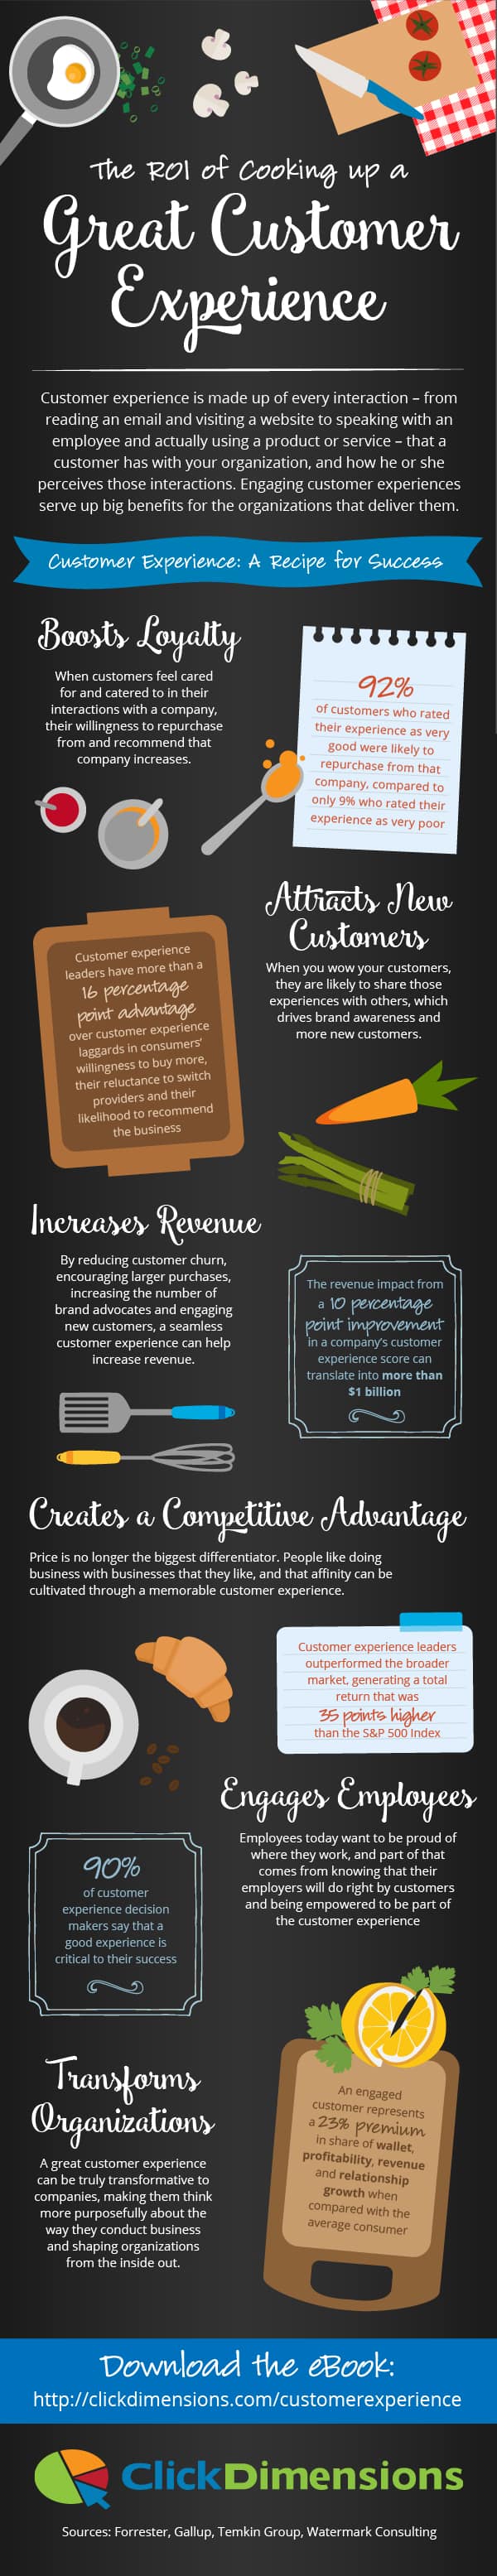 Customer Experience Infographic